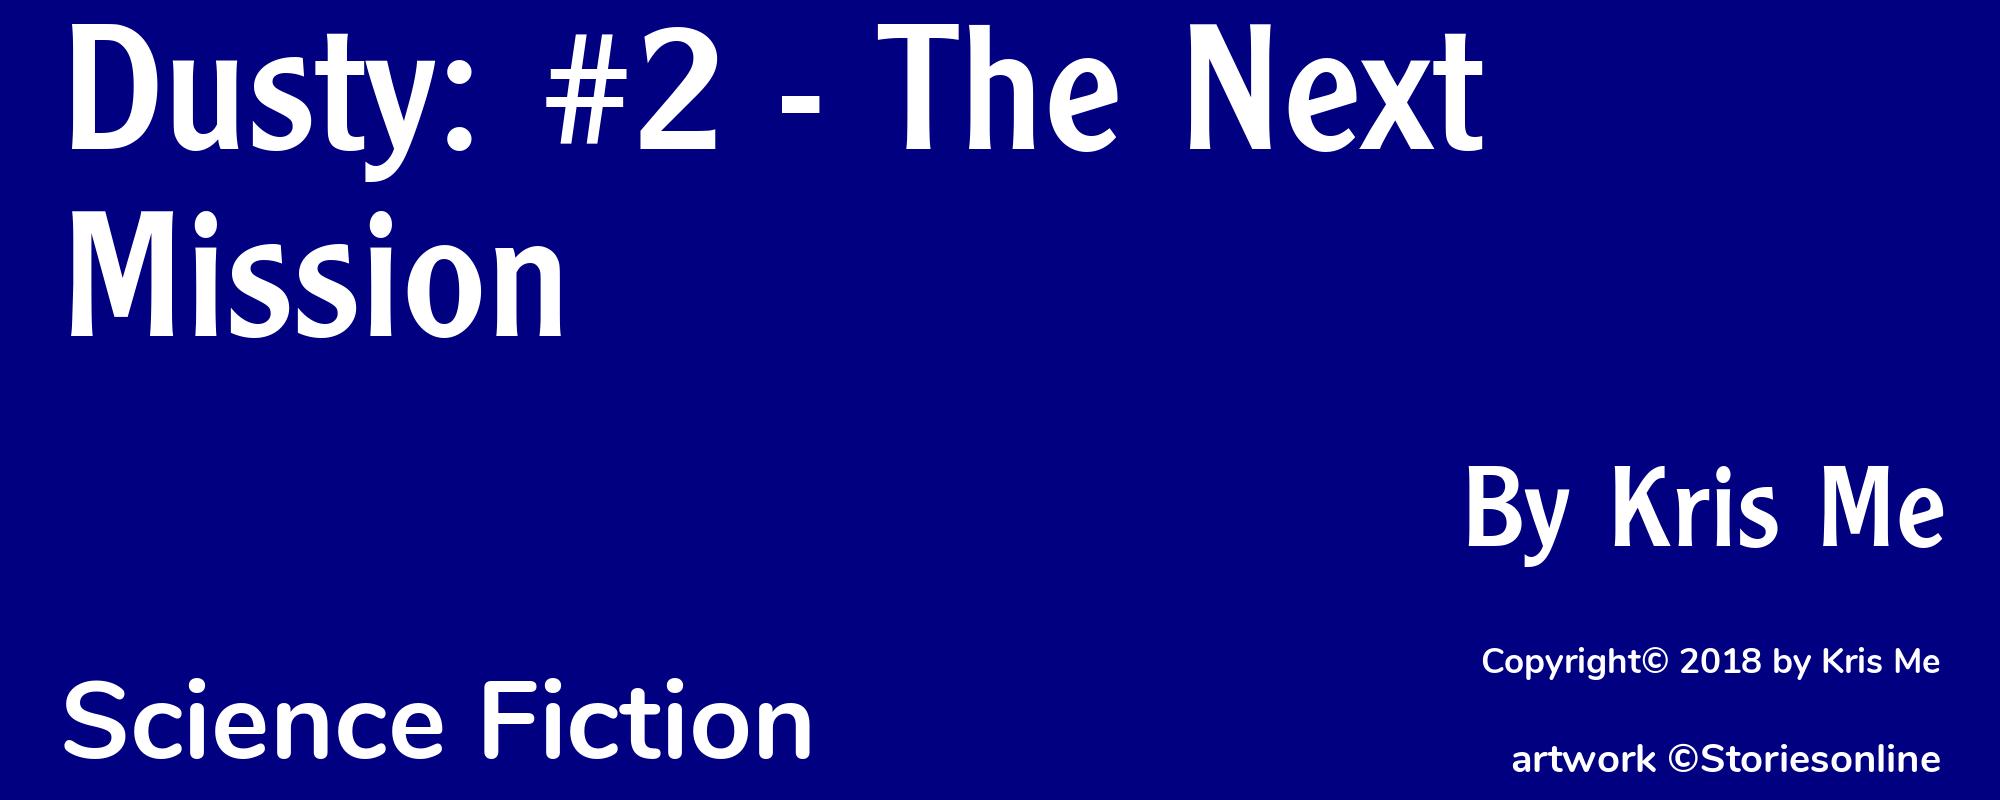 Dusty: #2 - The Next Mission - Cover